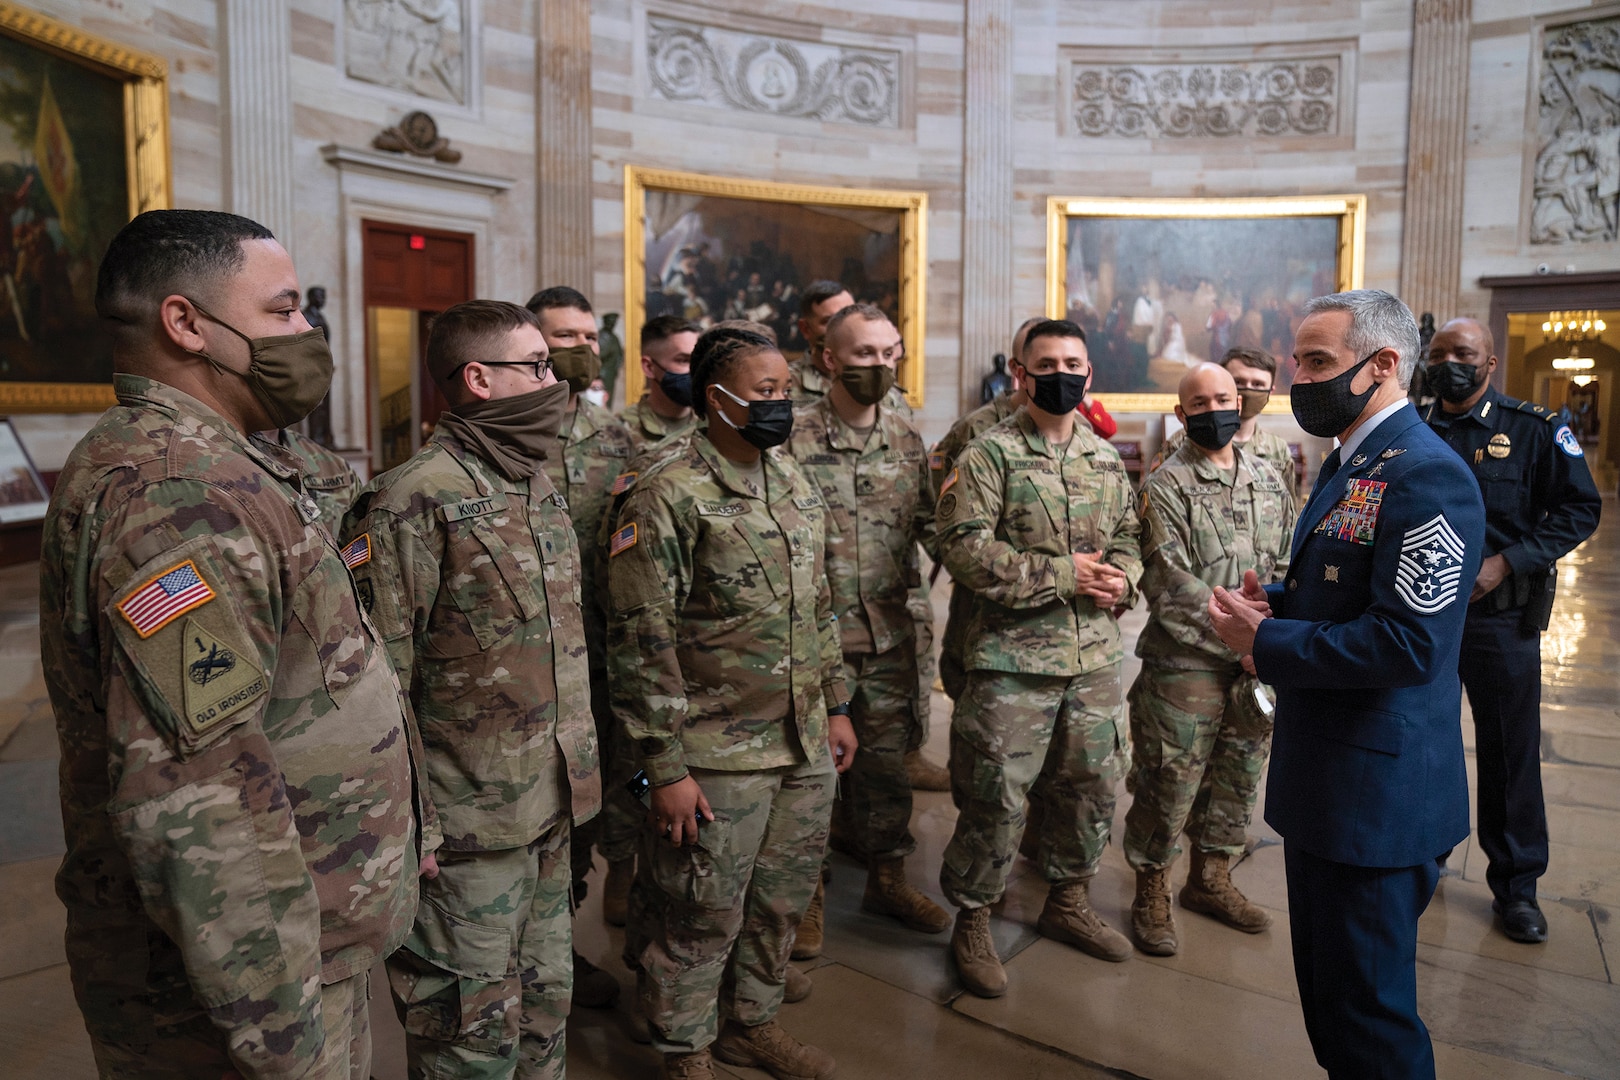 Senior Enlisted Advisor to the Chairman of the Joint Chiefs of Staff Ramón “CZ” Colón-López speaks with Servicemembers
and Capitol Police Officer in Capitol building, Washington, DC, February 25, 2021